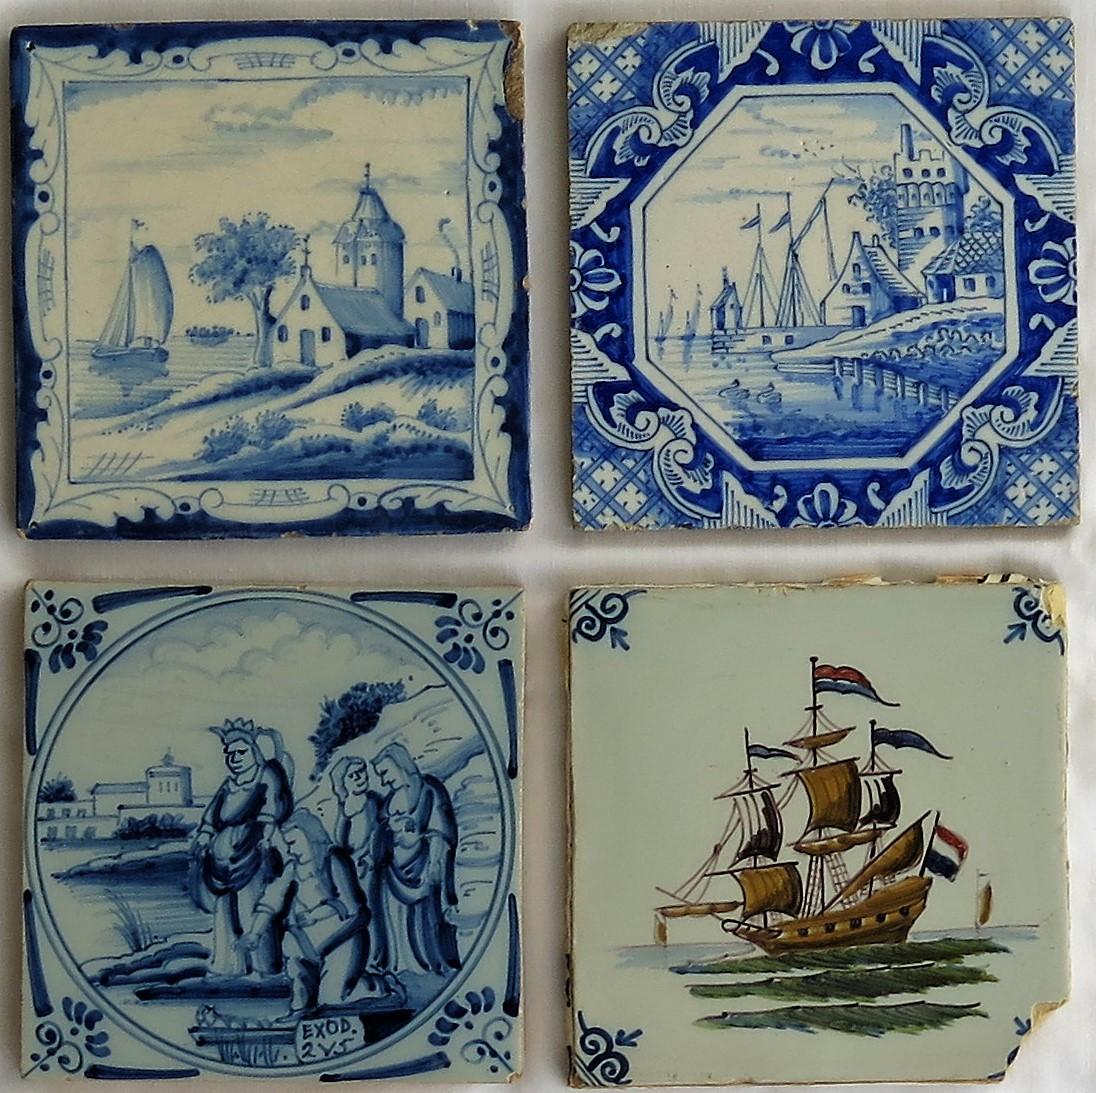 These are four attractive individual Delft ceramic wall tiles, dating to the second half of the 19th century.

All tiles are nominally 5 inches square and 5/16 to 3/8 inches thick. 

Tile 1 - Top Left hand - Blue and White
Hand painted in